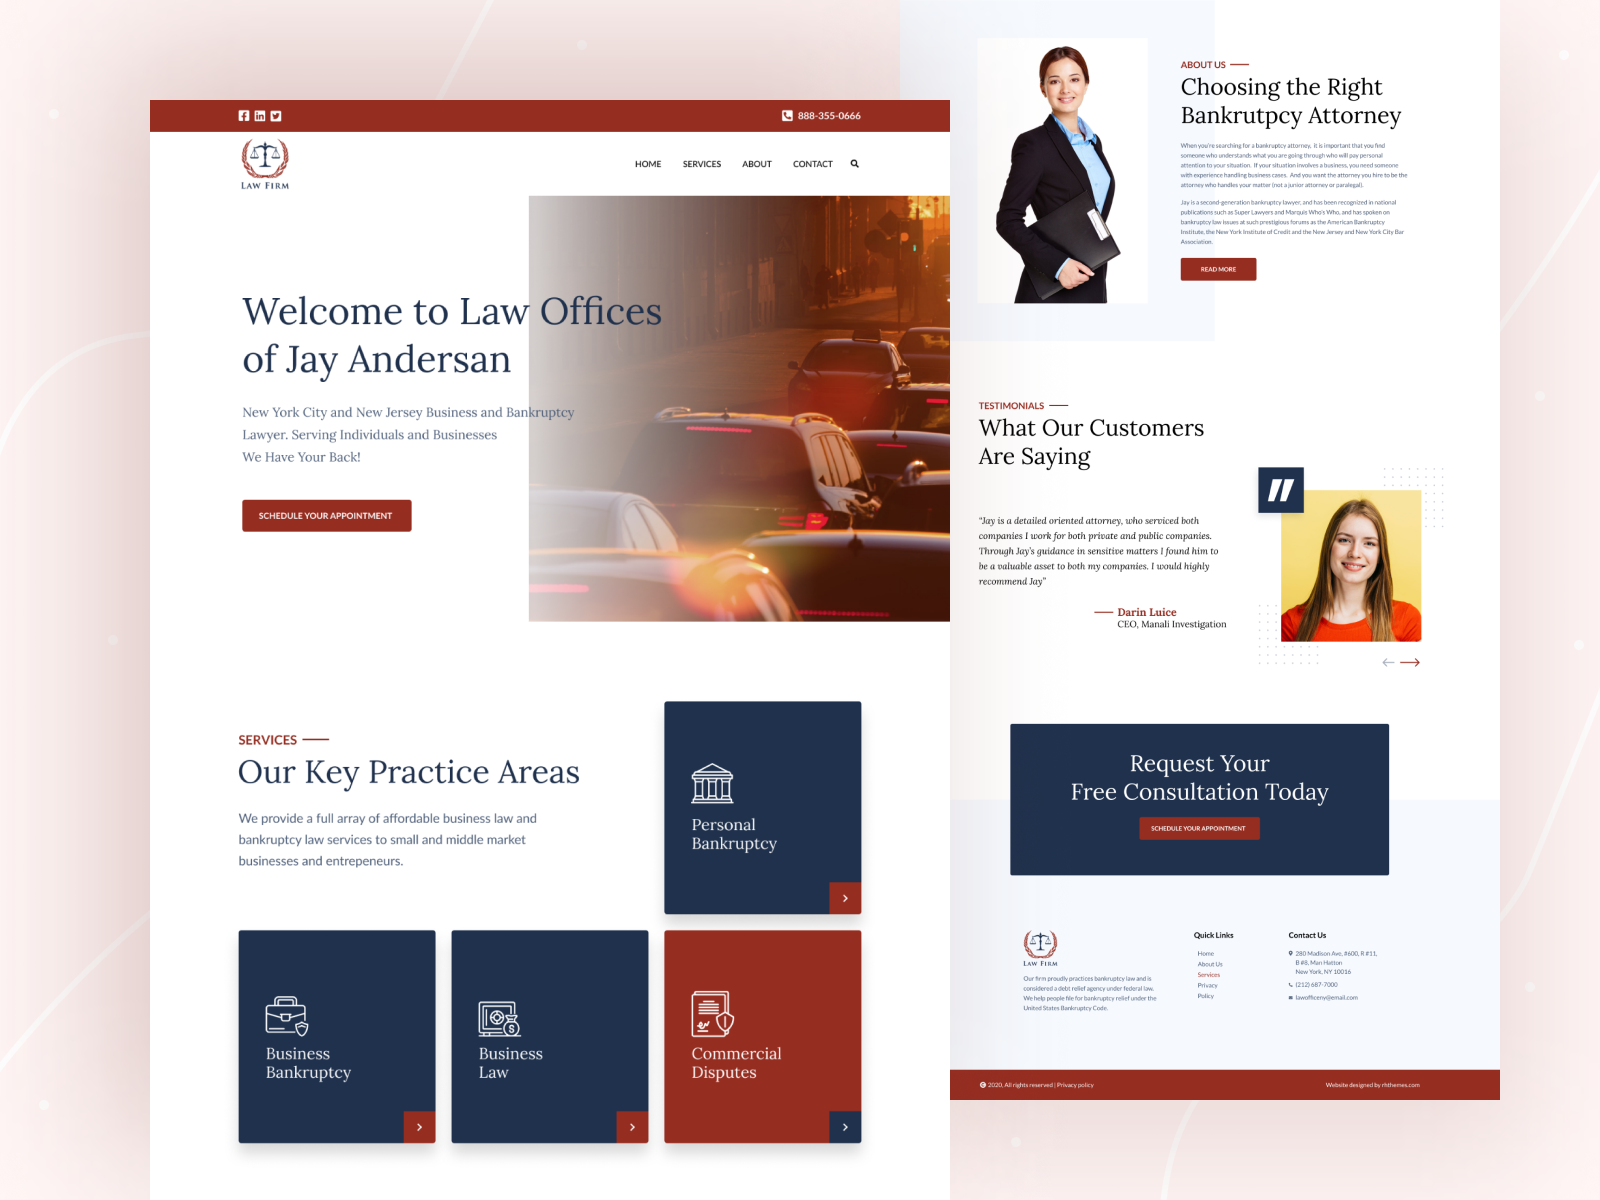 Australian Owned And Operated Law Firm Website Design Sutherland Shire Web Design